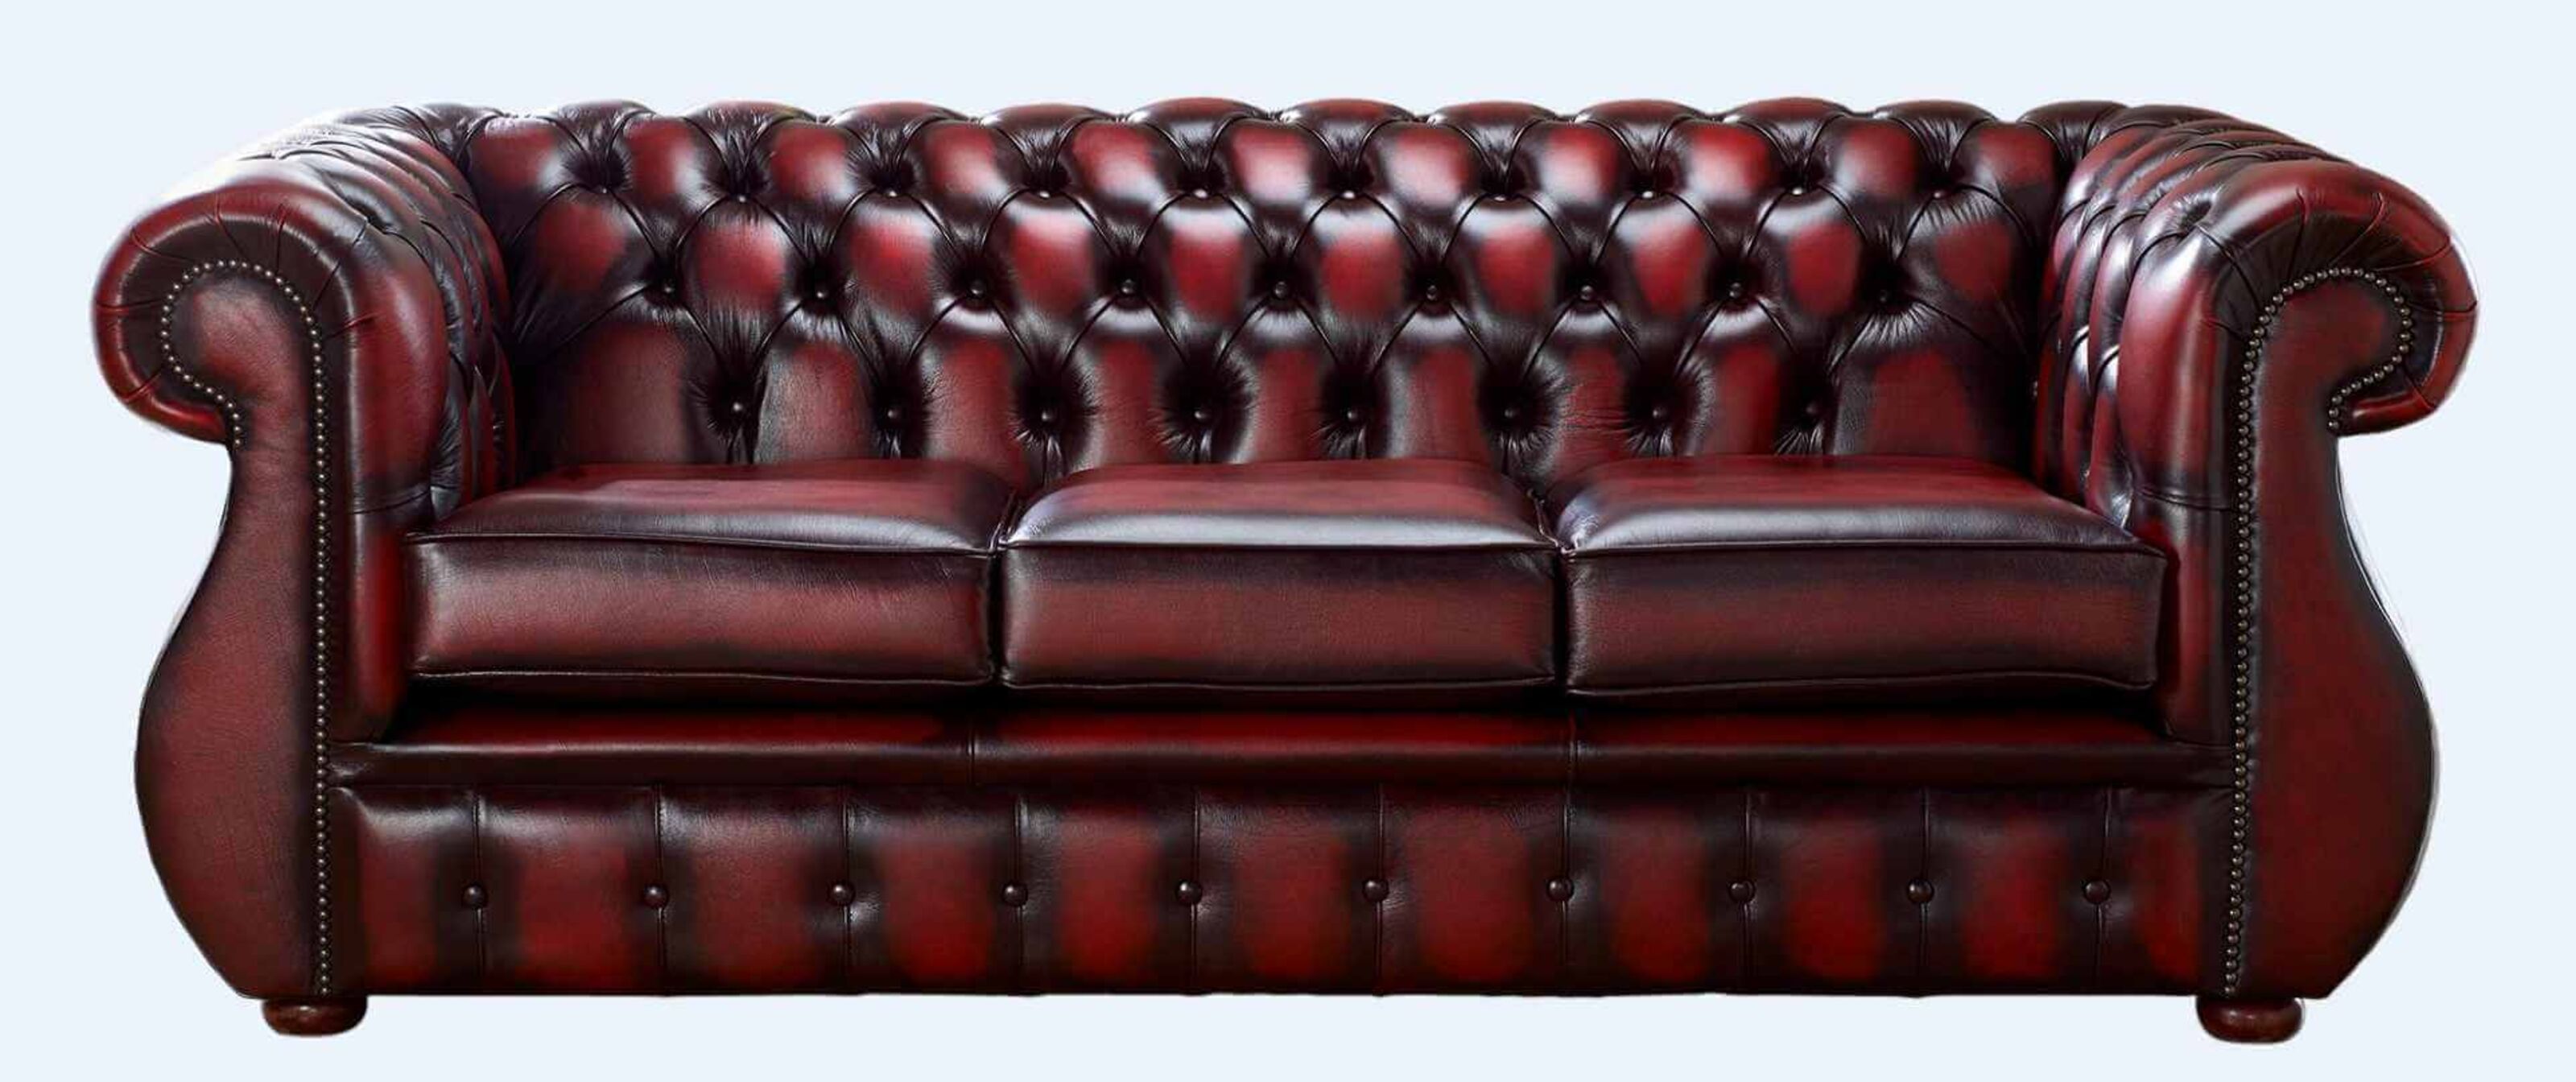 Sofa Satisfaction: Unbiased Reviews of Chesterfield Sofa Companies  %Post Title